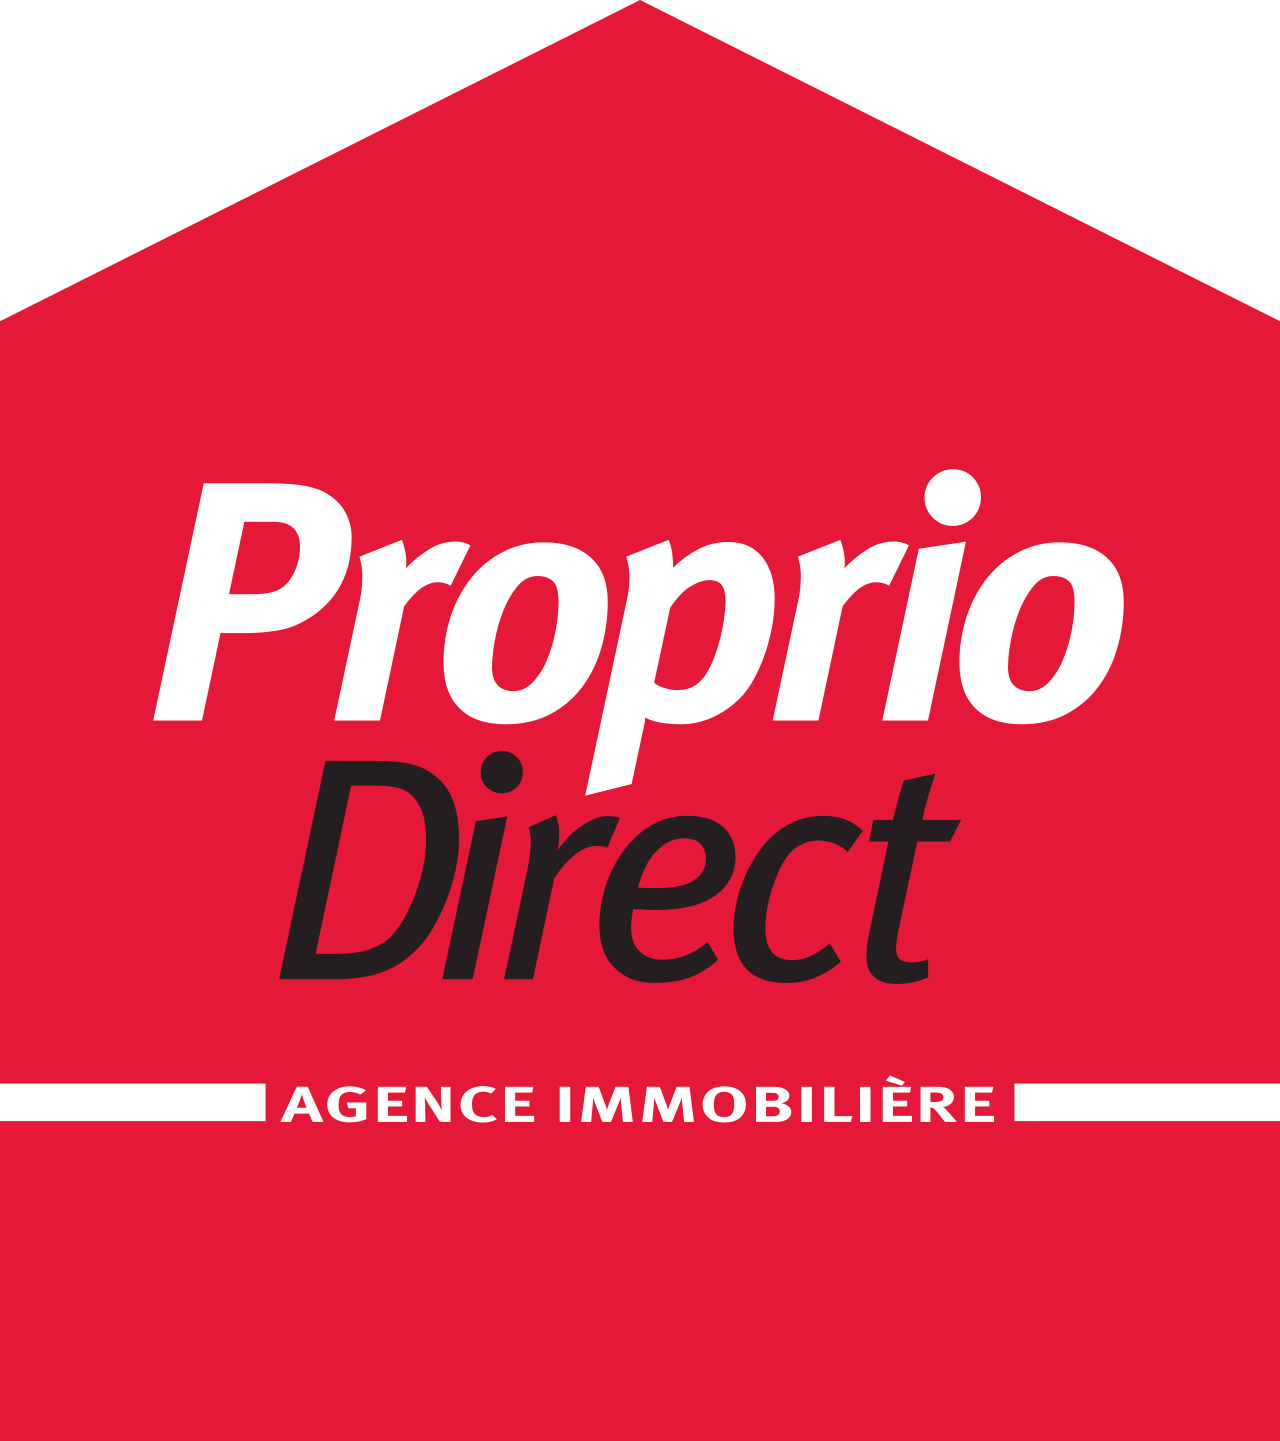 Proprio Direct Real Estate Agency